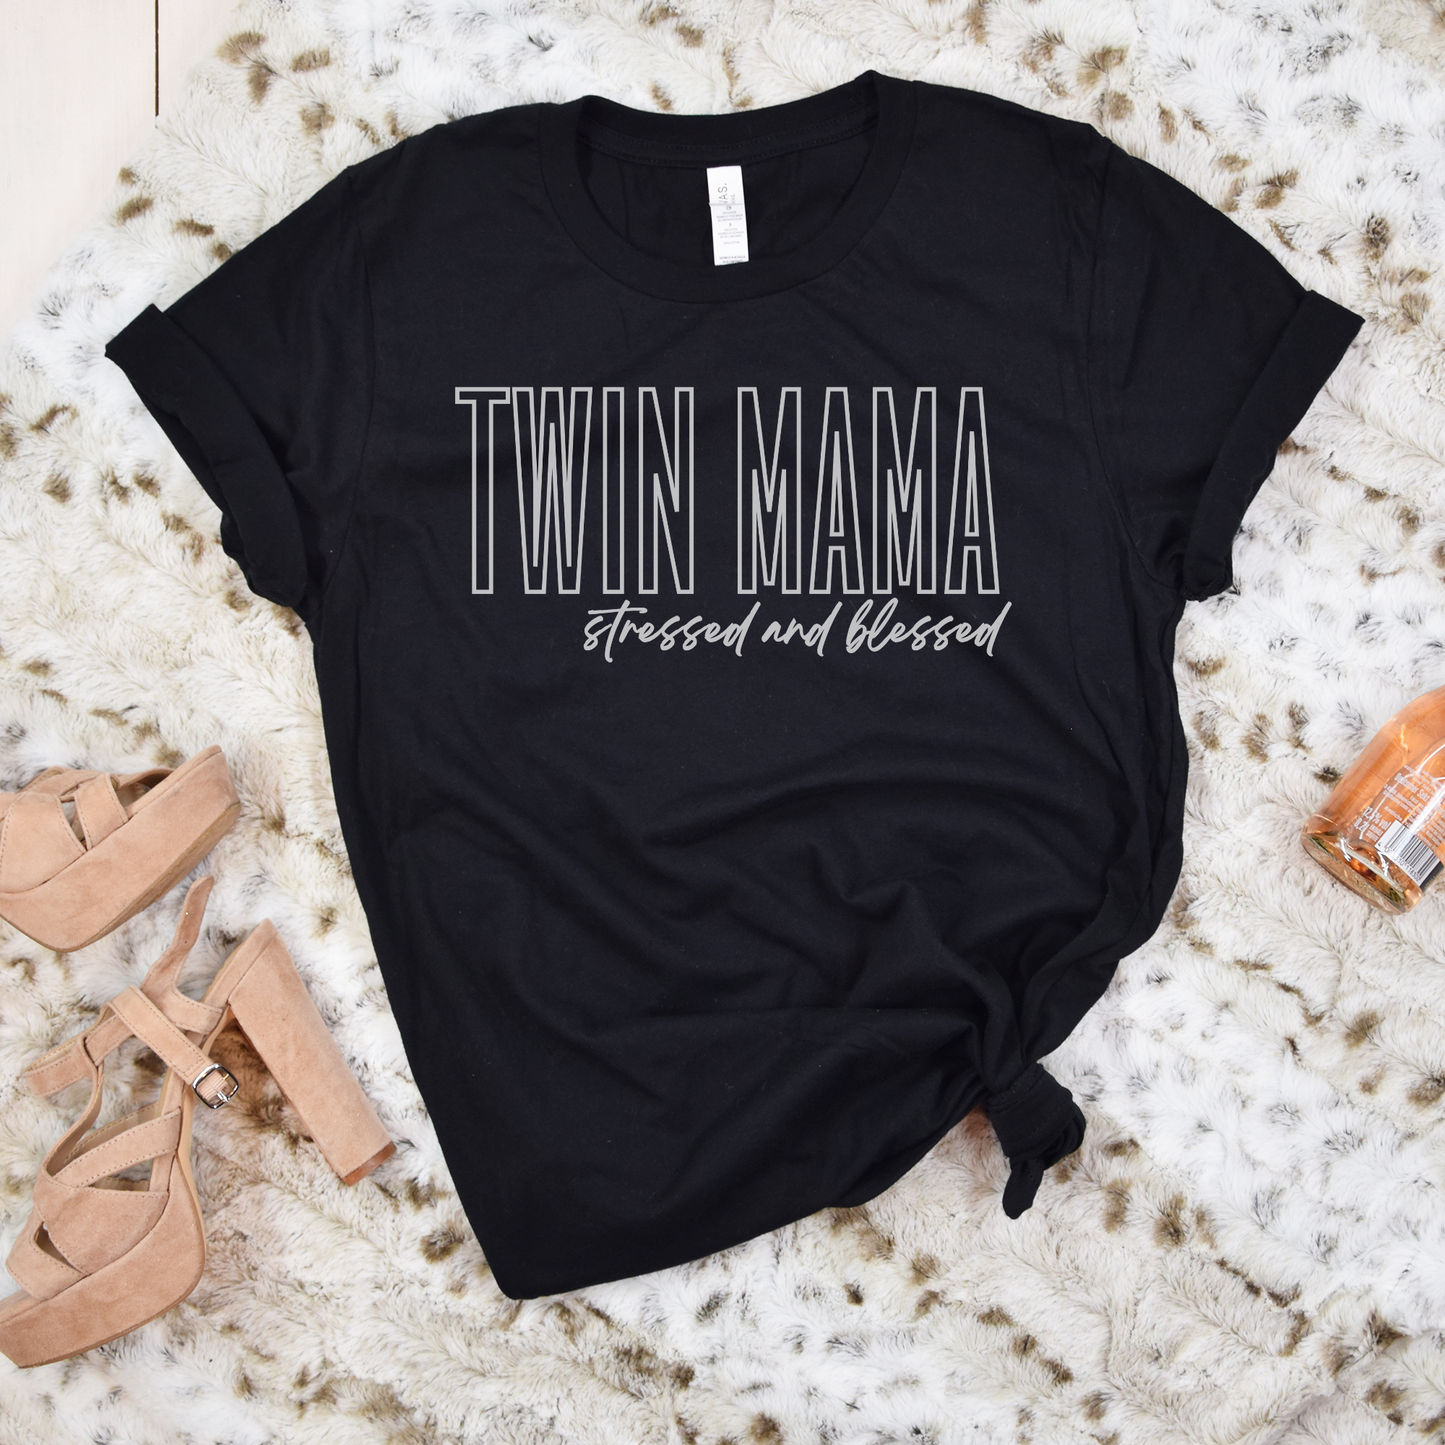 Twin Mama Stressed and Blessed White Block Hollow Letters Paint Style Script Unisex Jersey Short Sleeve Tee Small-3XL Mother of Multiples